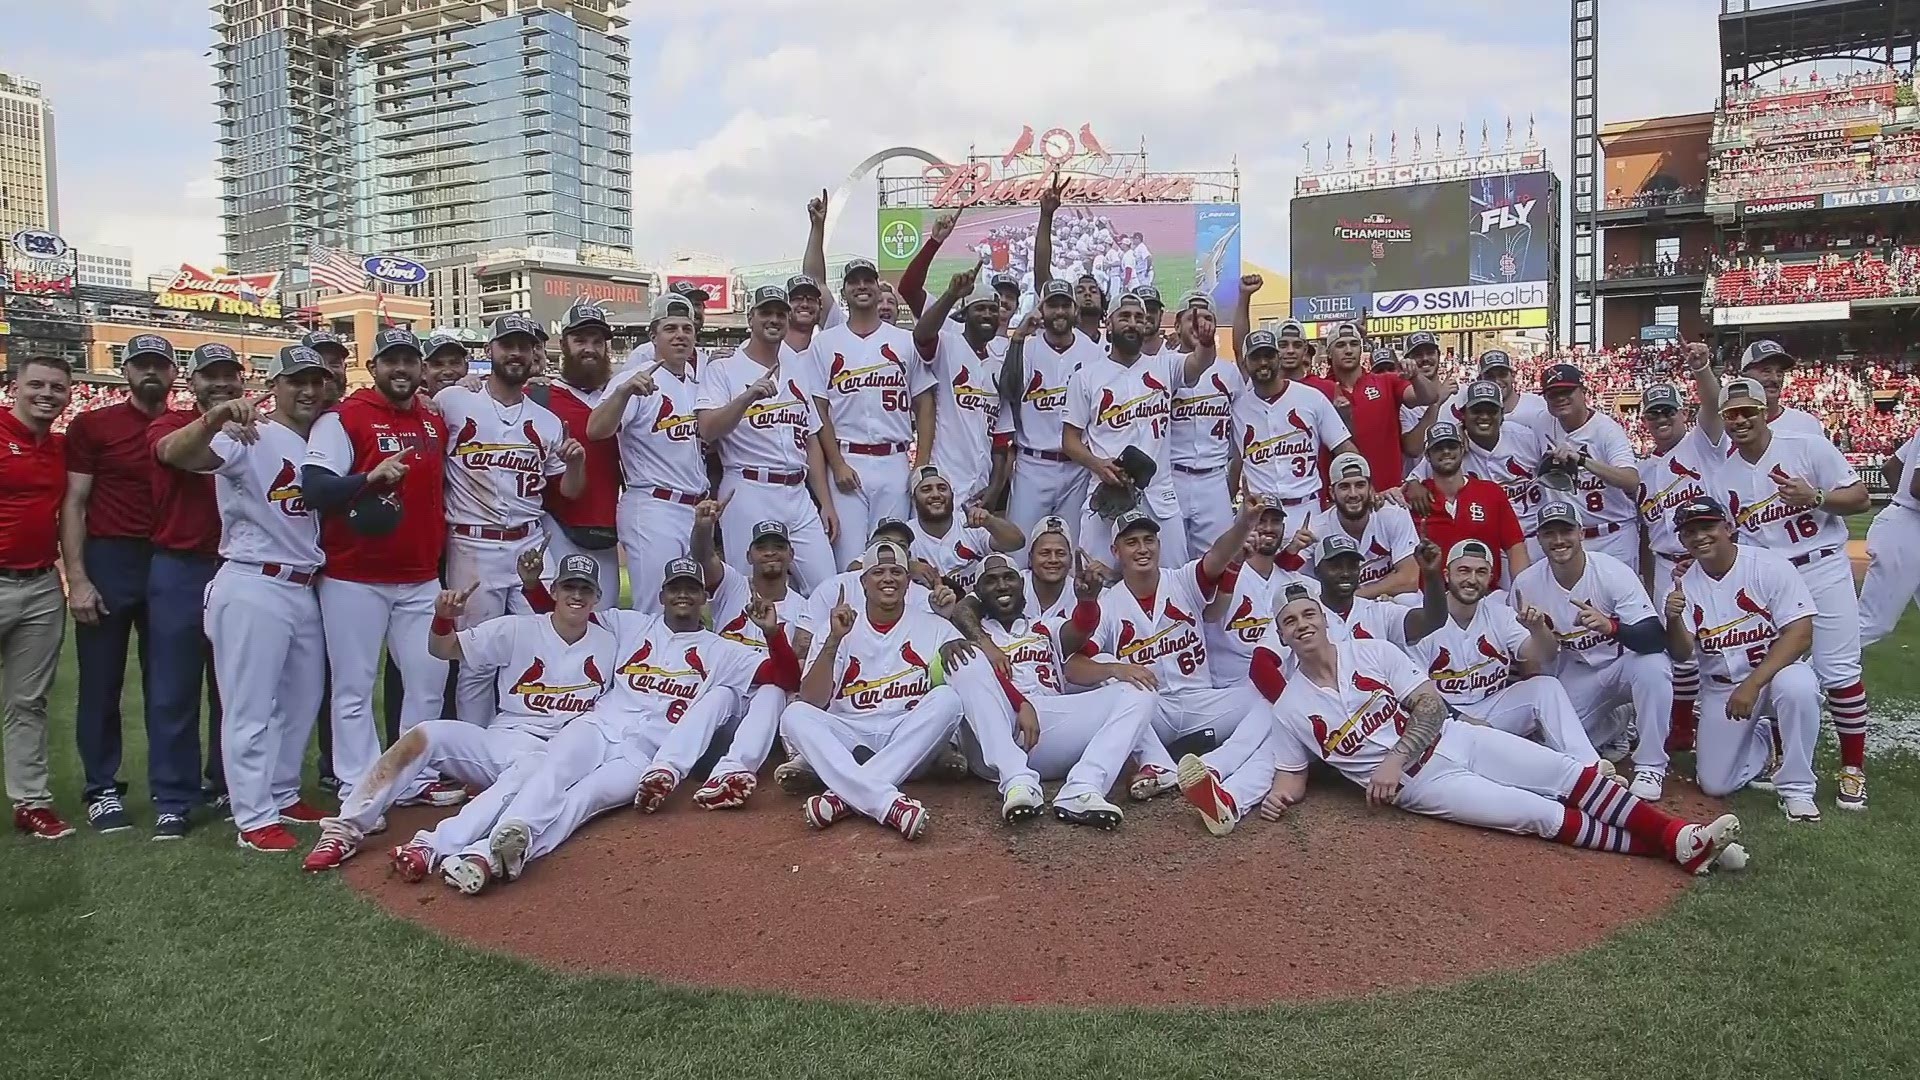 The playoffs are making it clear that the Cardinals underutilized